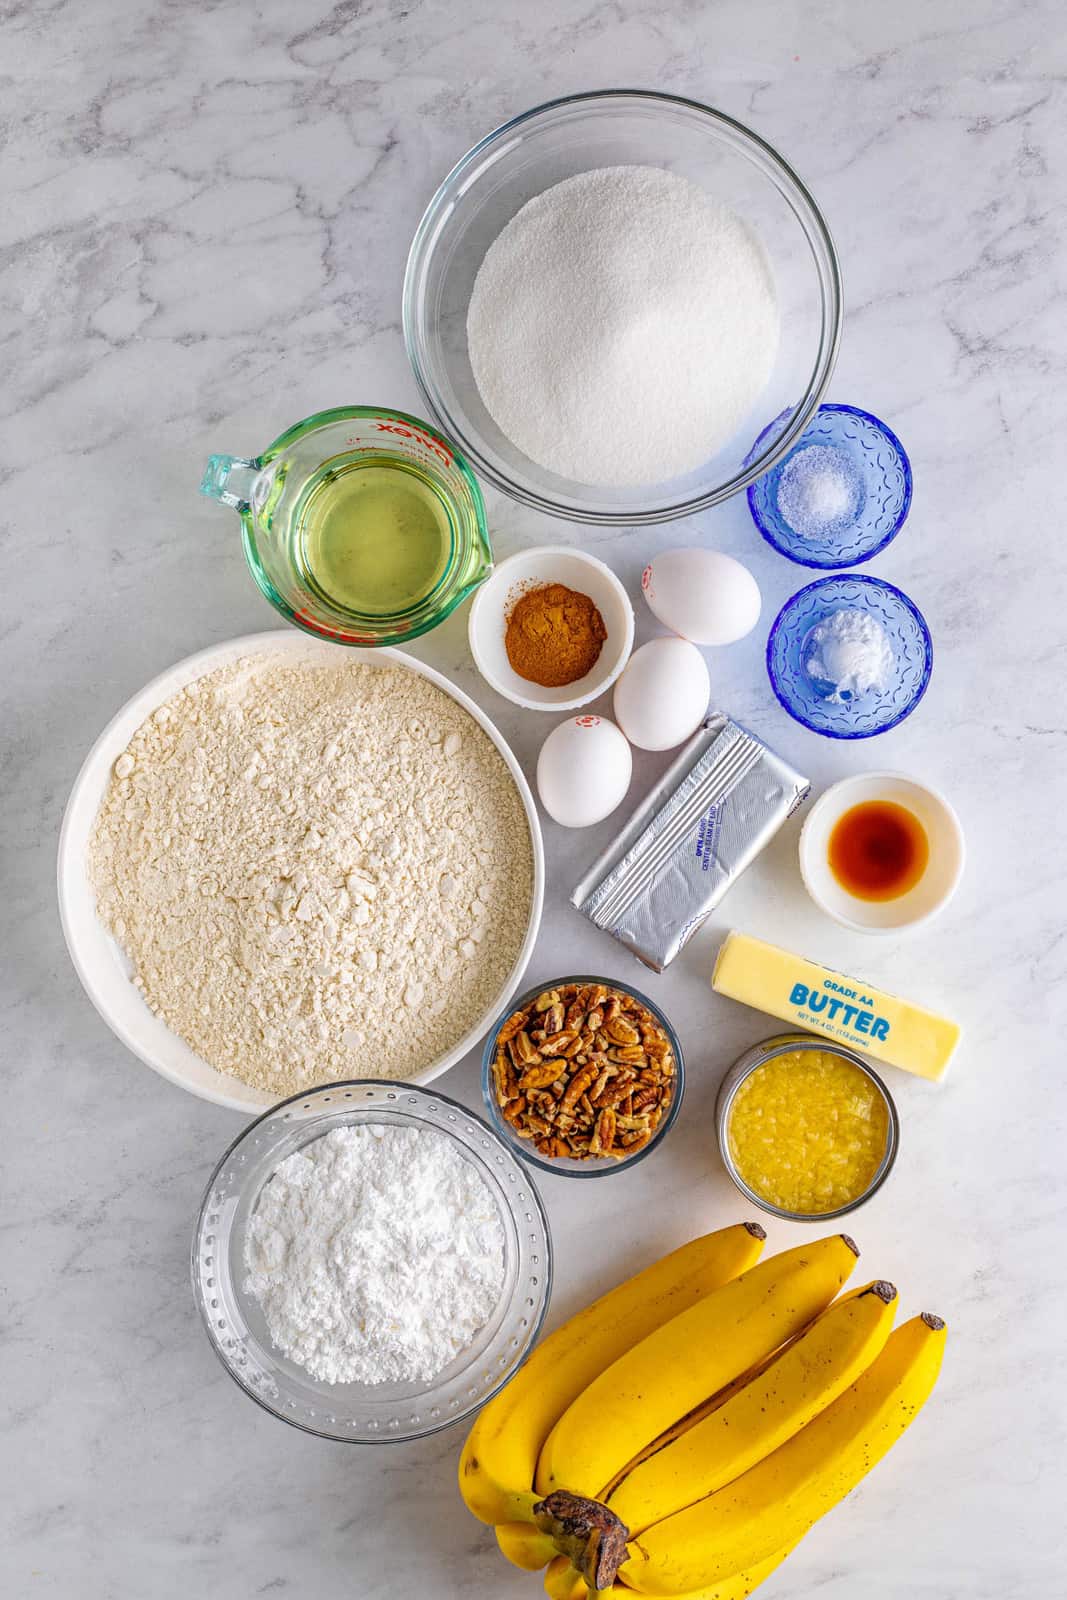 Ingredients needed to make a Hummingbird Cake.